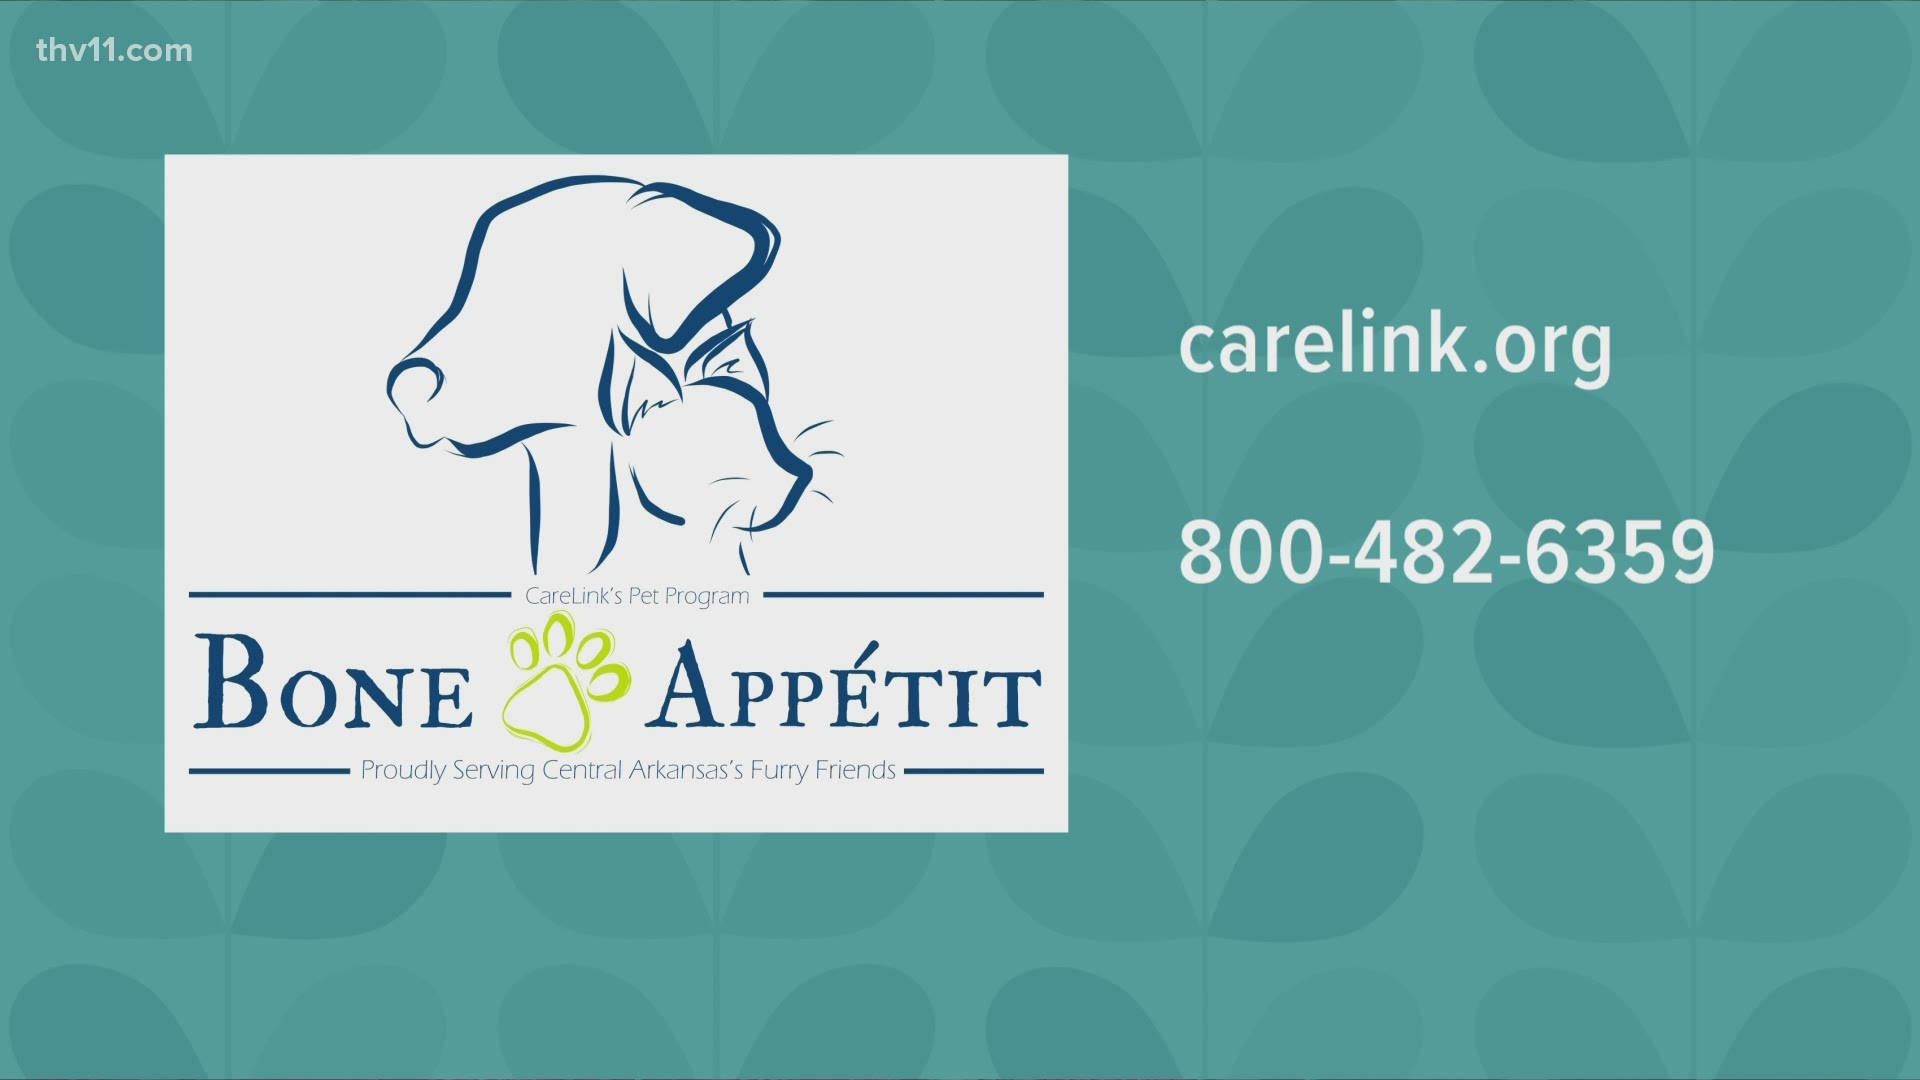 CareLink’s new Bone Appétit program assists senior pet owners to help keep their pets fed and healthy.